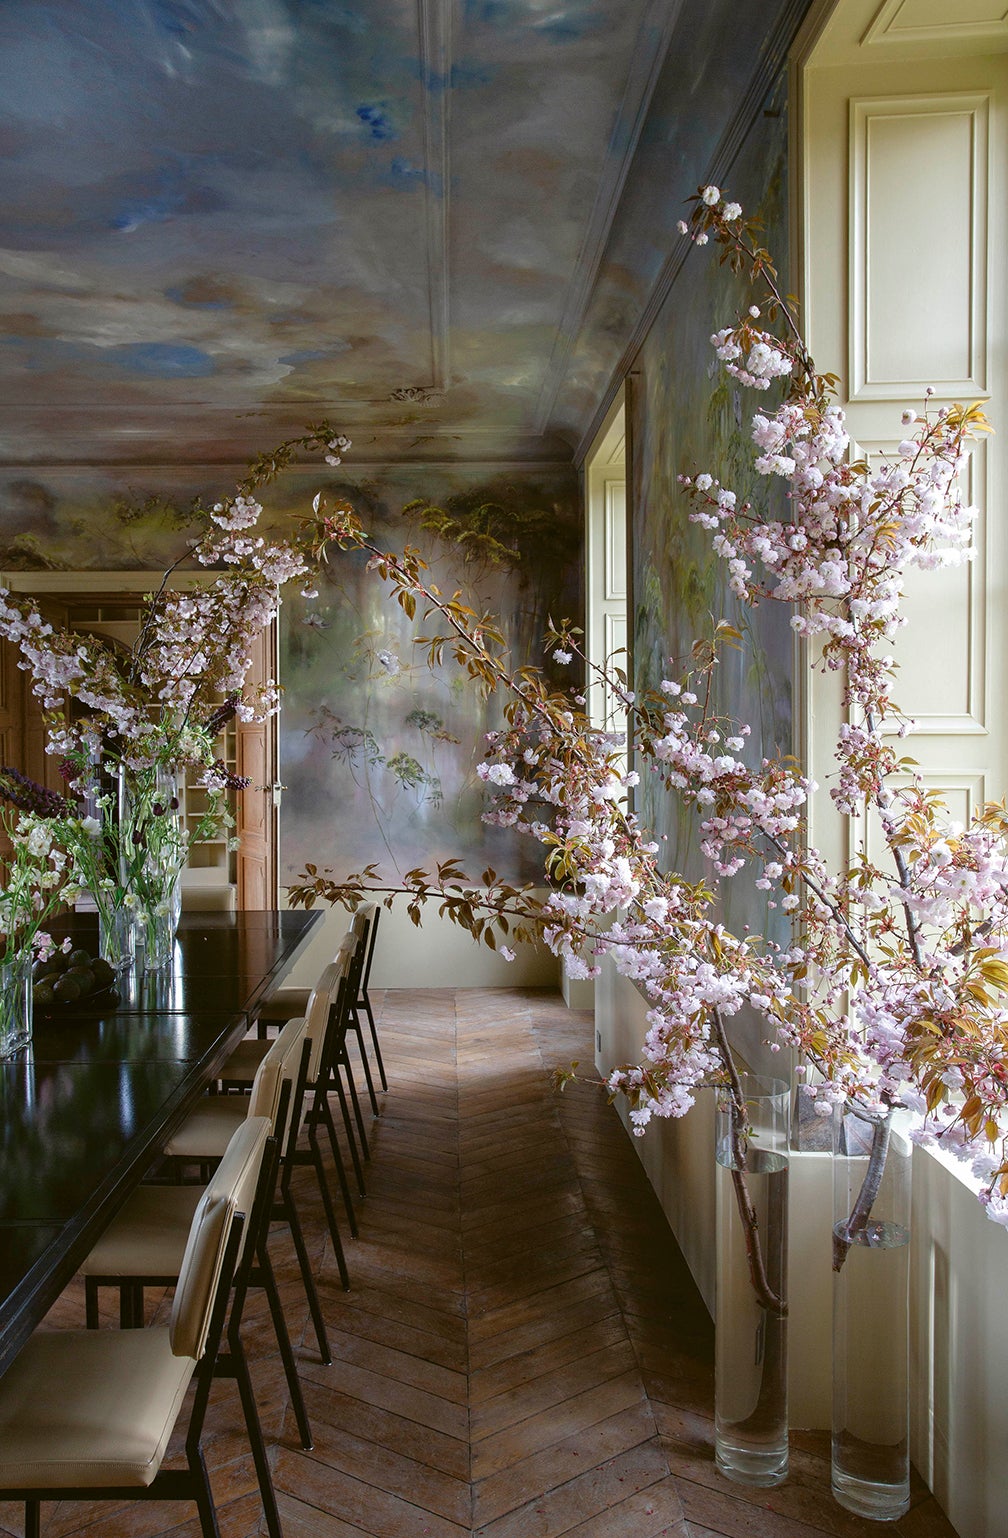 Dining room with painted mural and ceiling